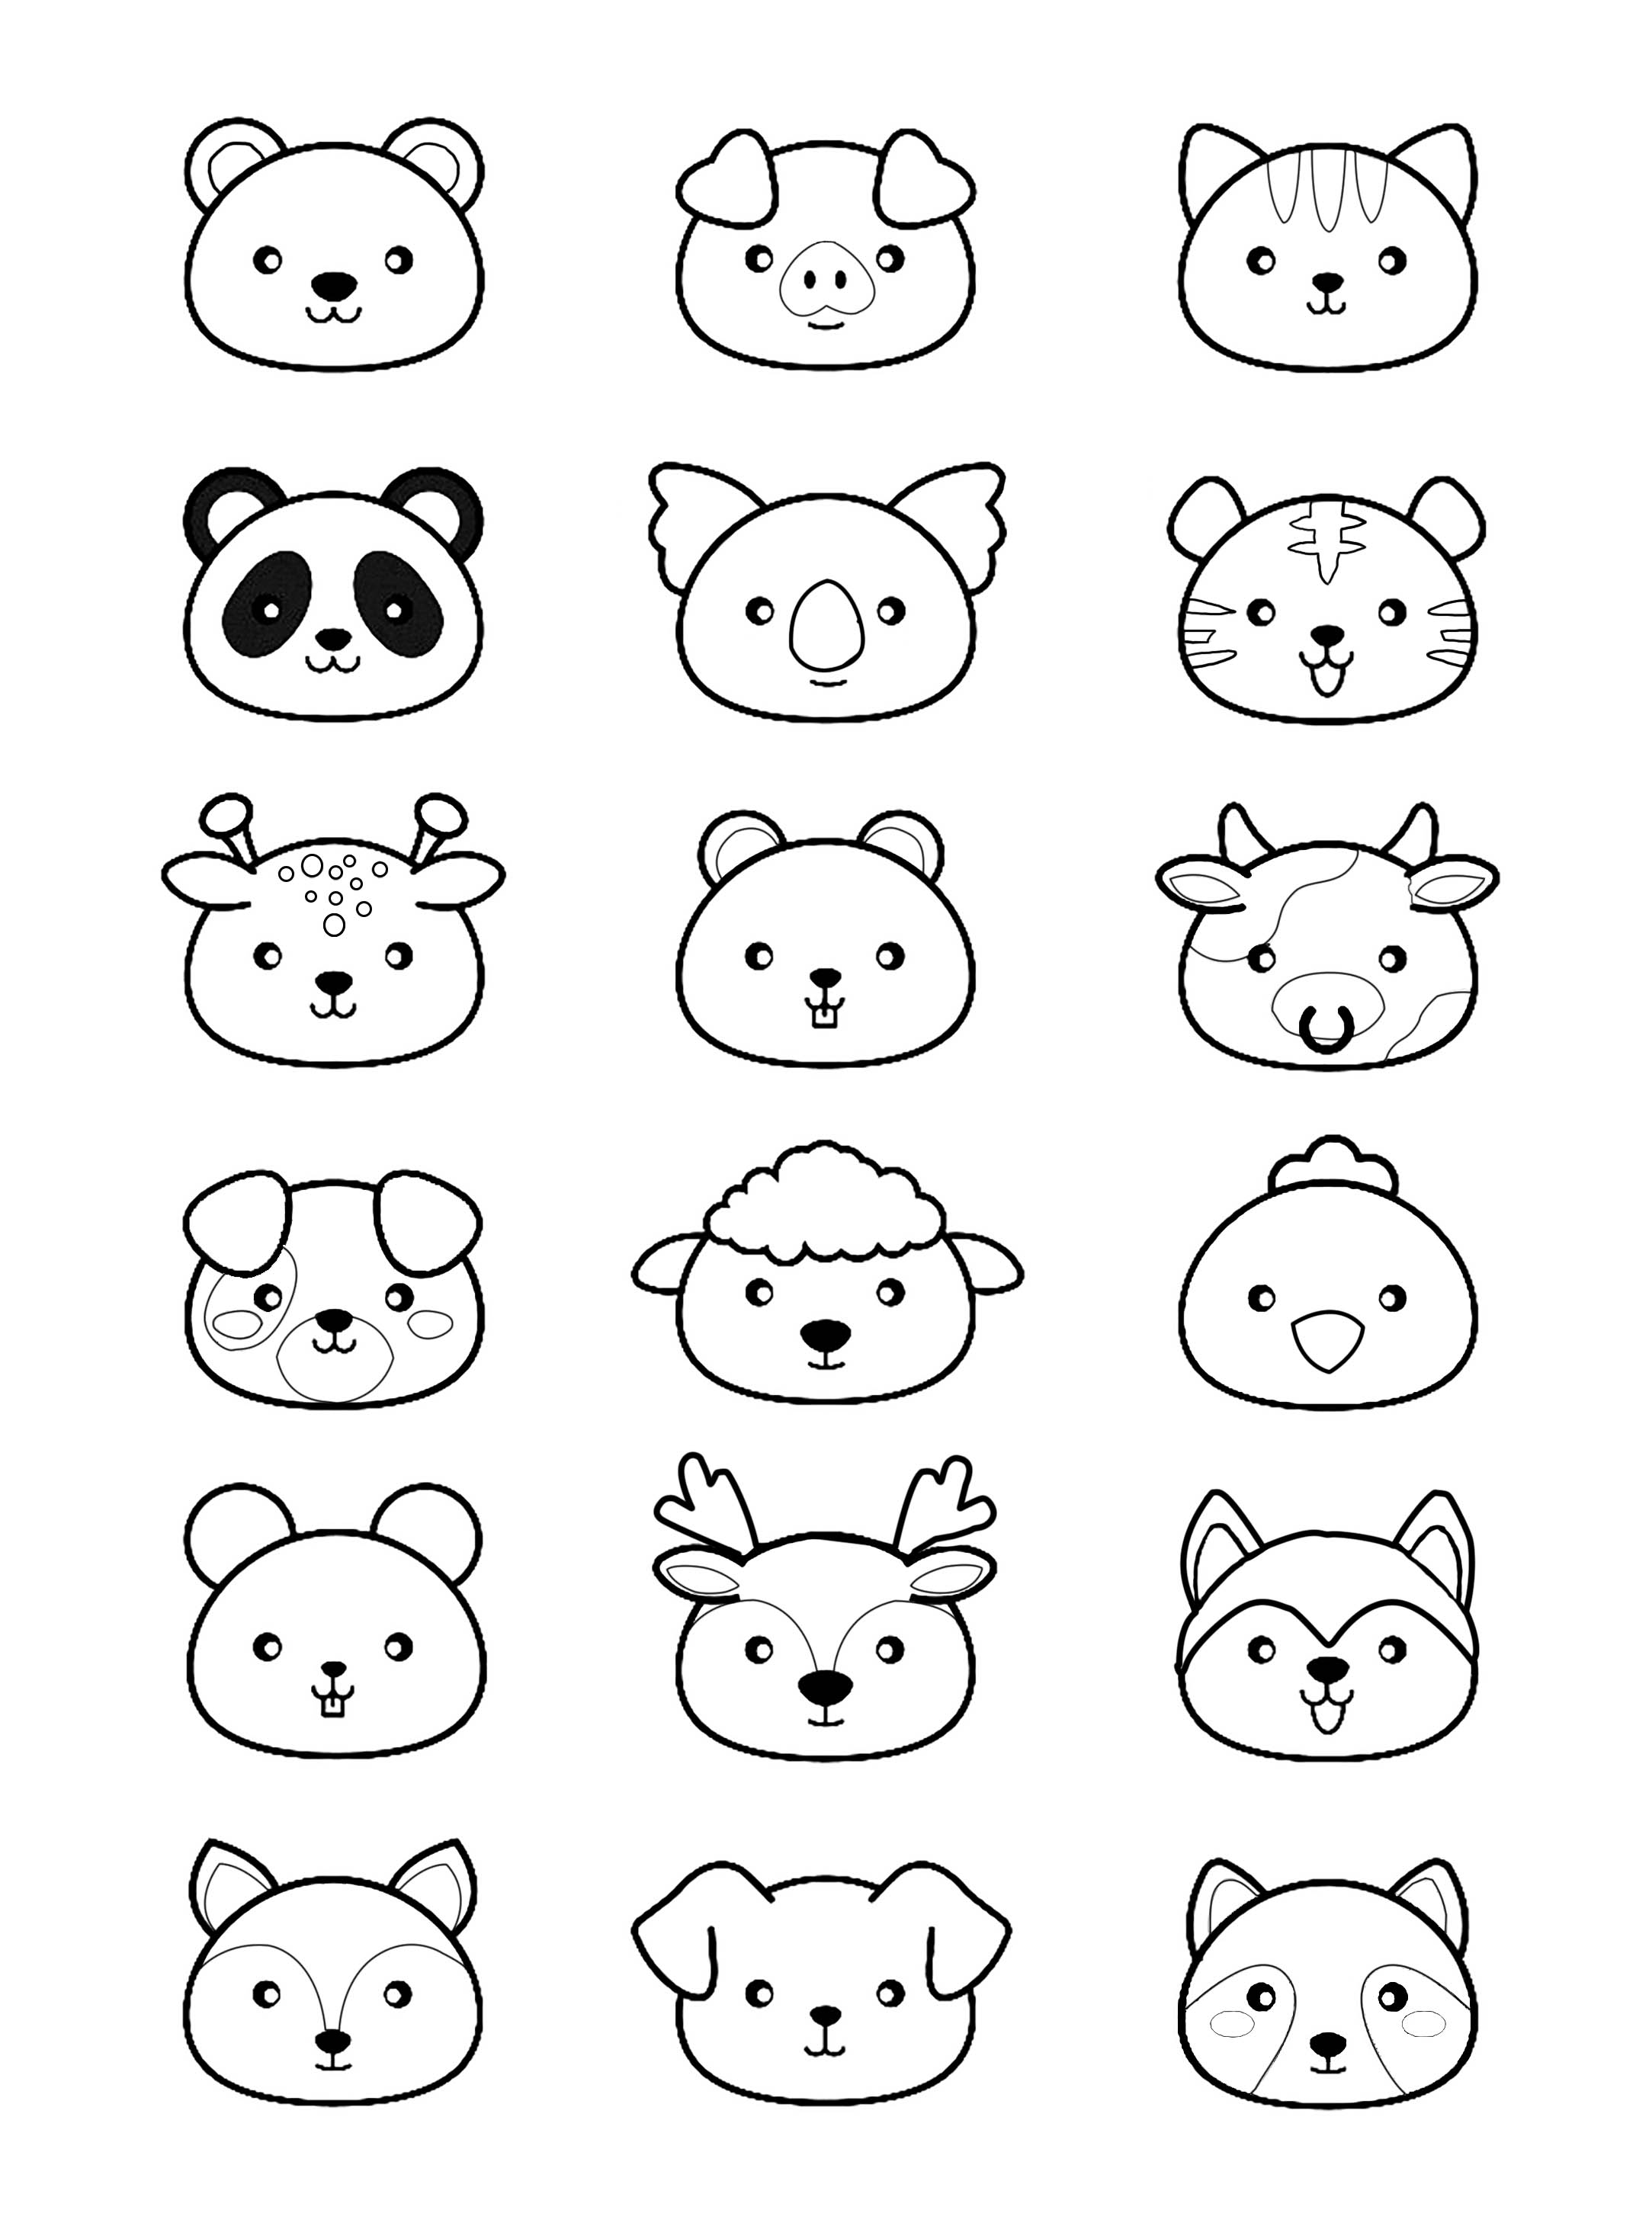 Kawaii - Coloring Pages for Adults - Page 2